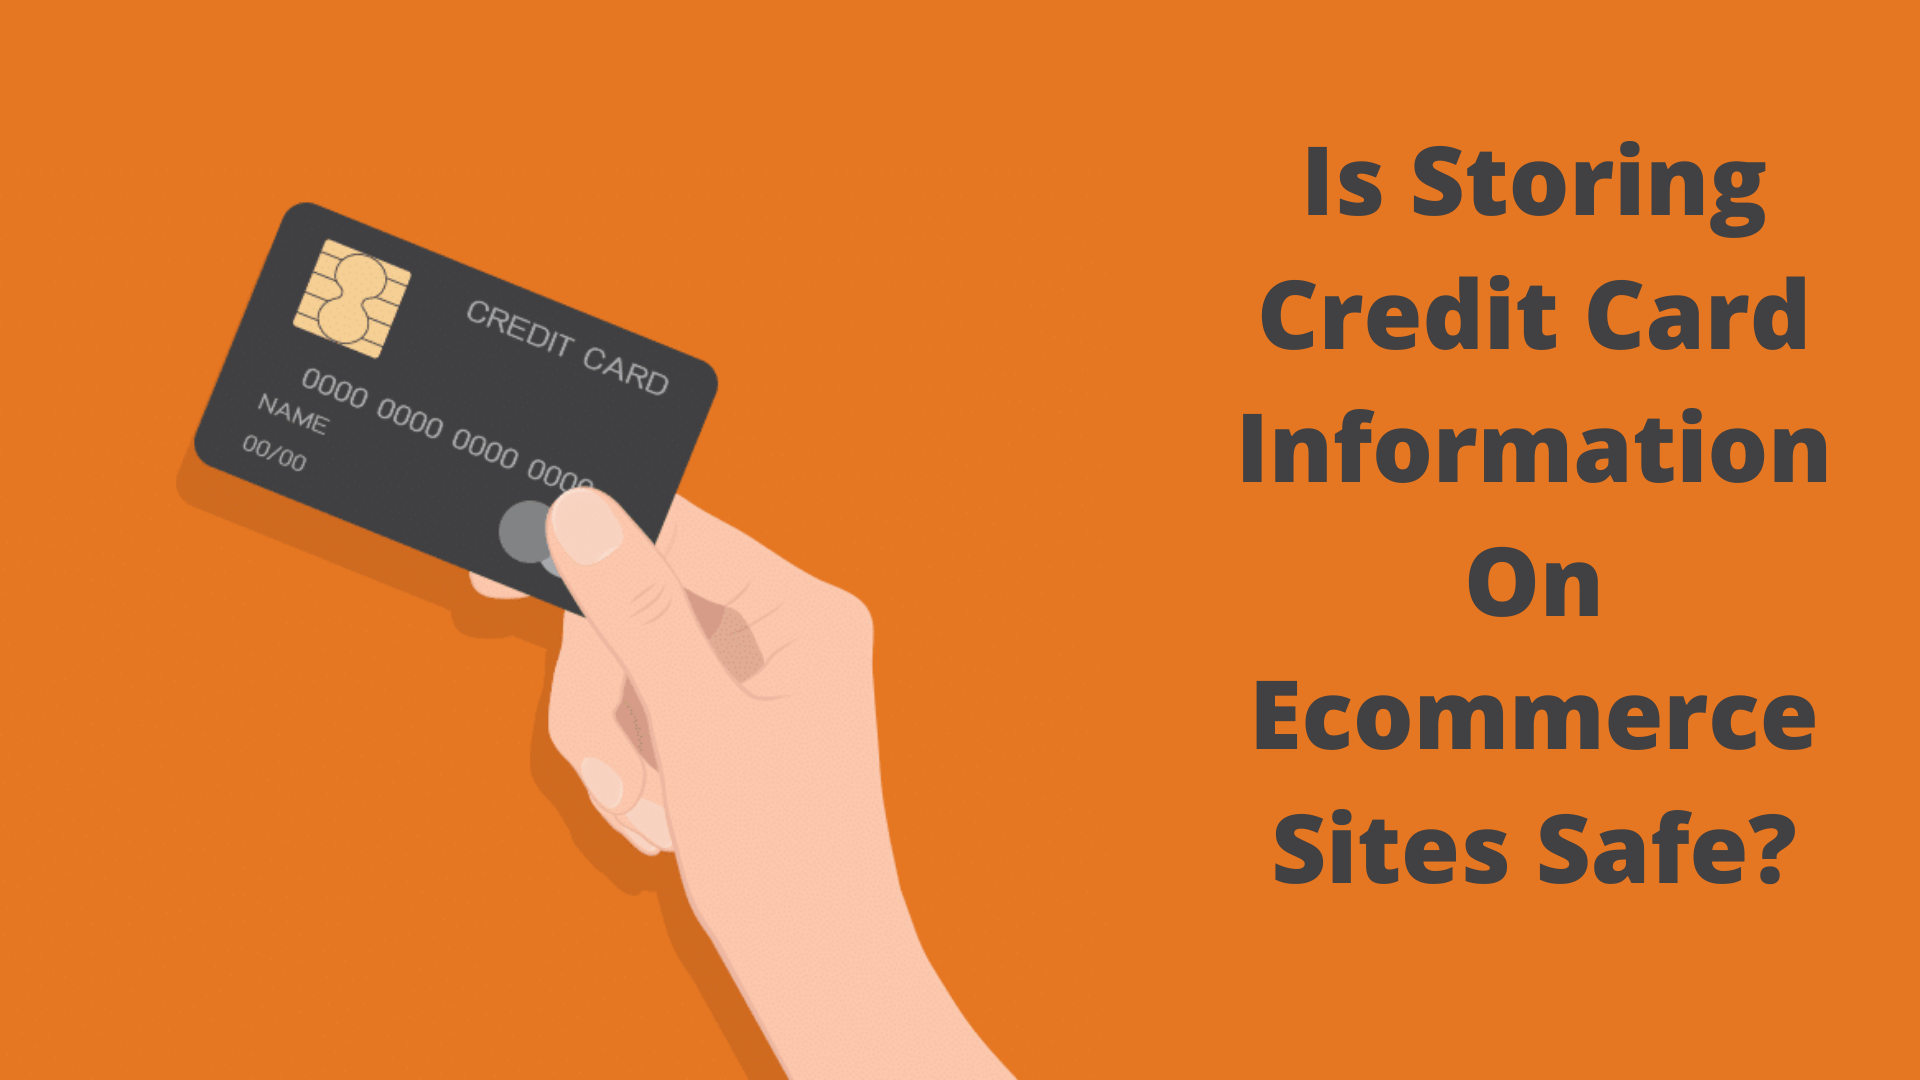 Credit Card Information On Ecommerce Sites (2) (1)